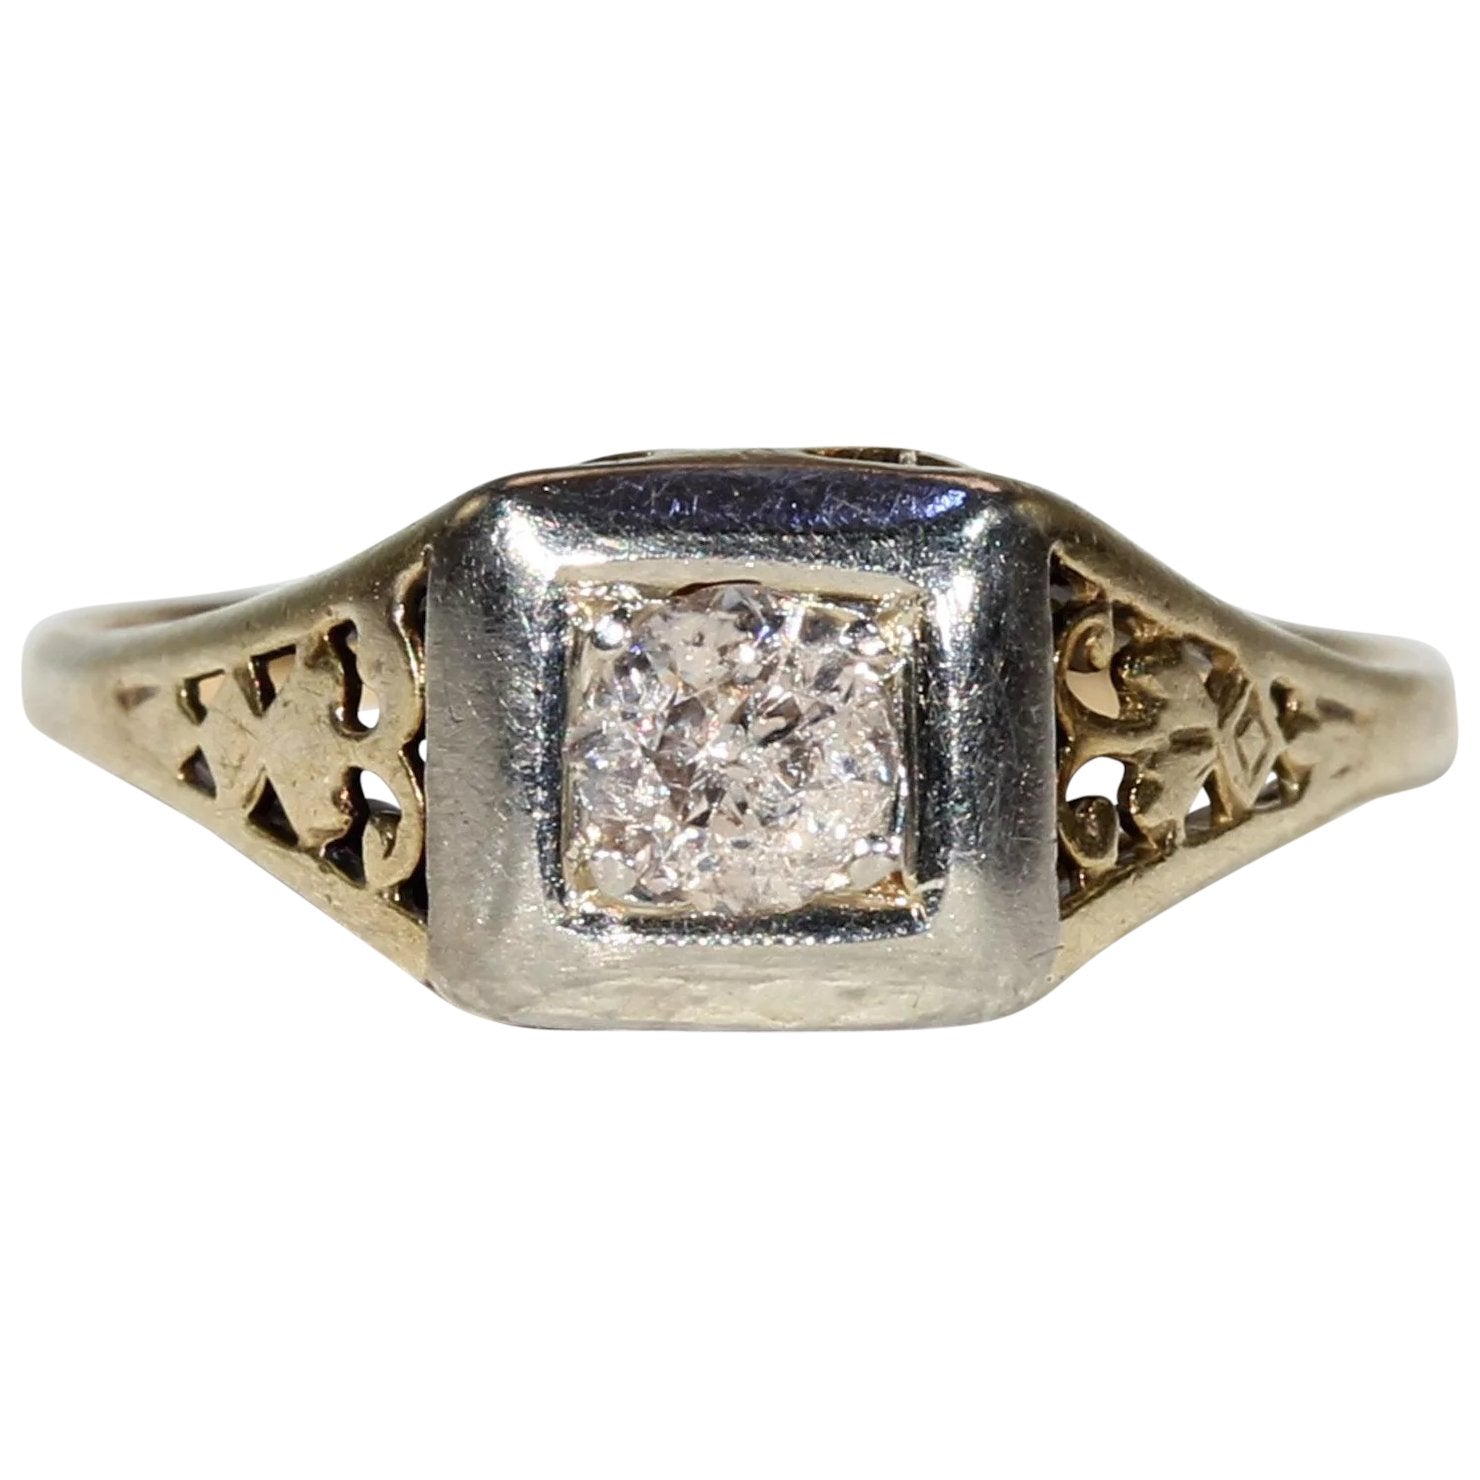 Vintage Gold Diamond Solitaire Ring